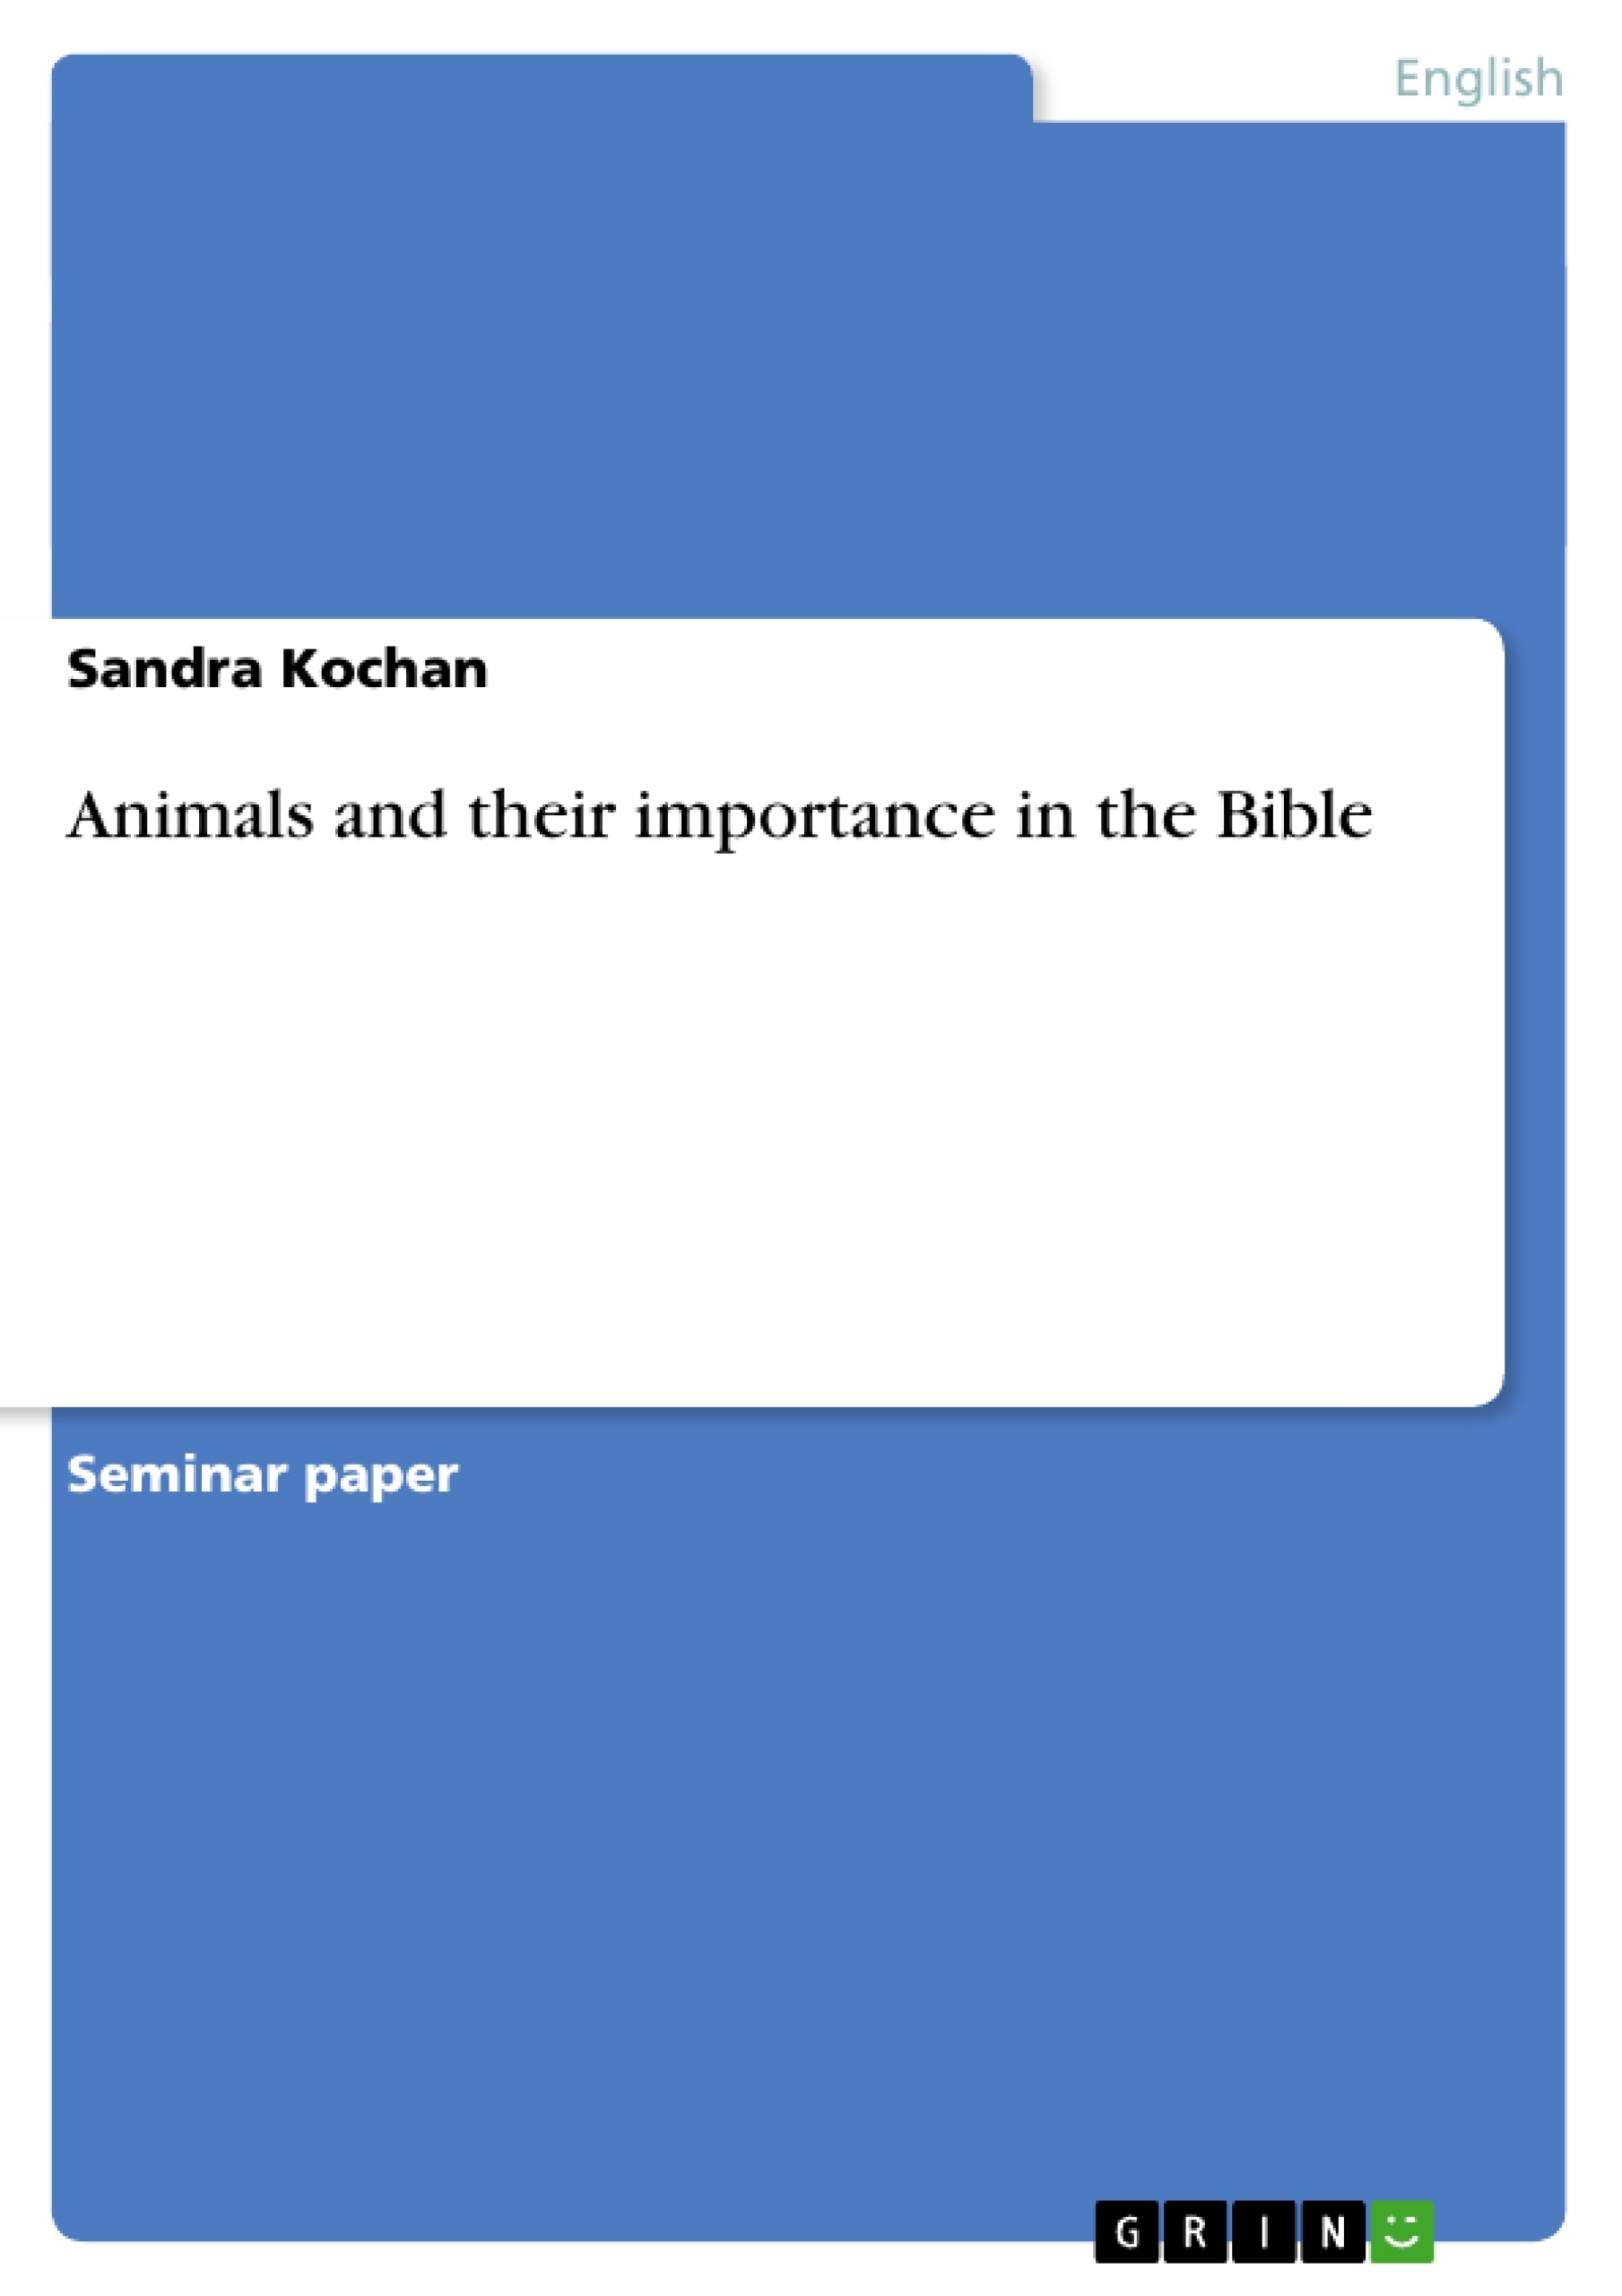 Animals and their importance in the Bible - GRIN